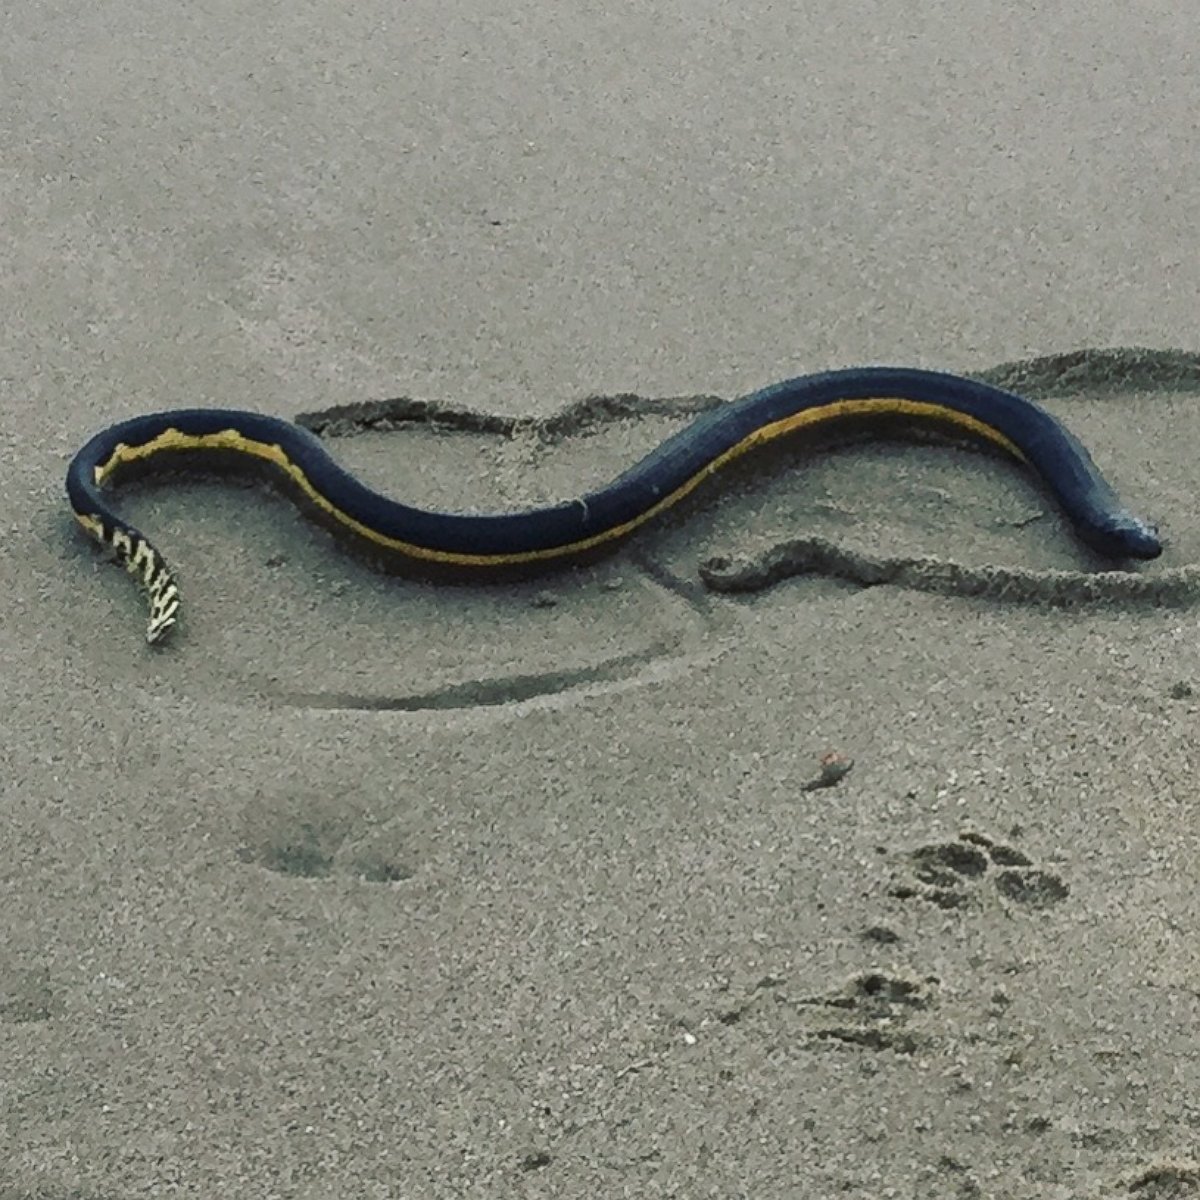 PHOTO: Anna Iker saw this snake, believed to be a yellow bellied sea snake, on the beach in Southern California.